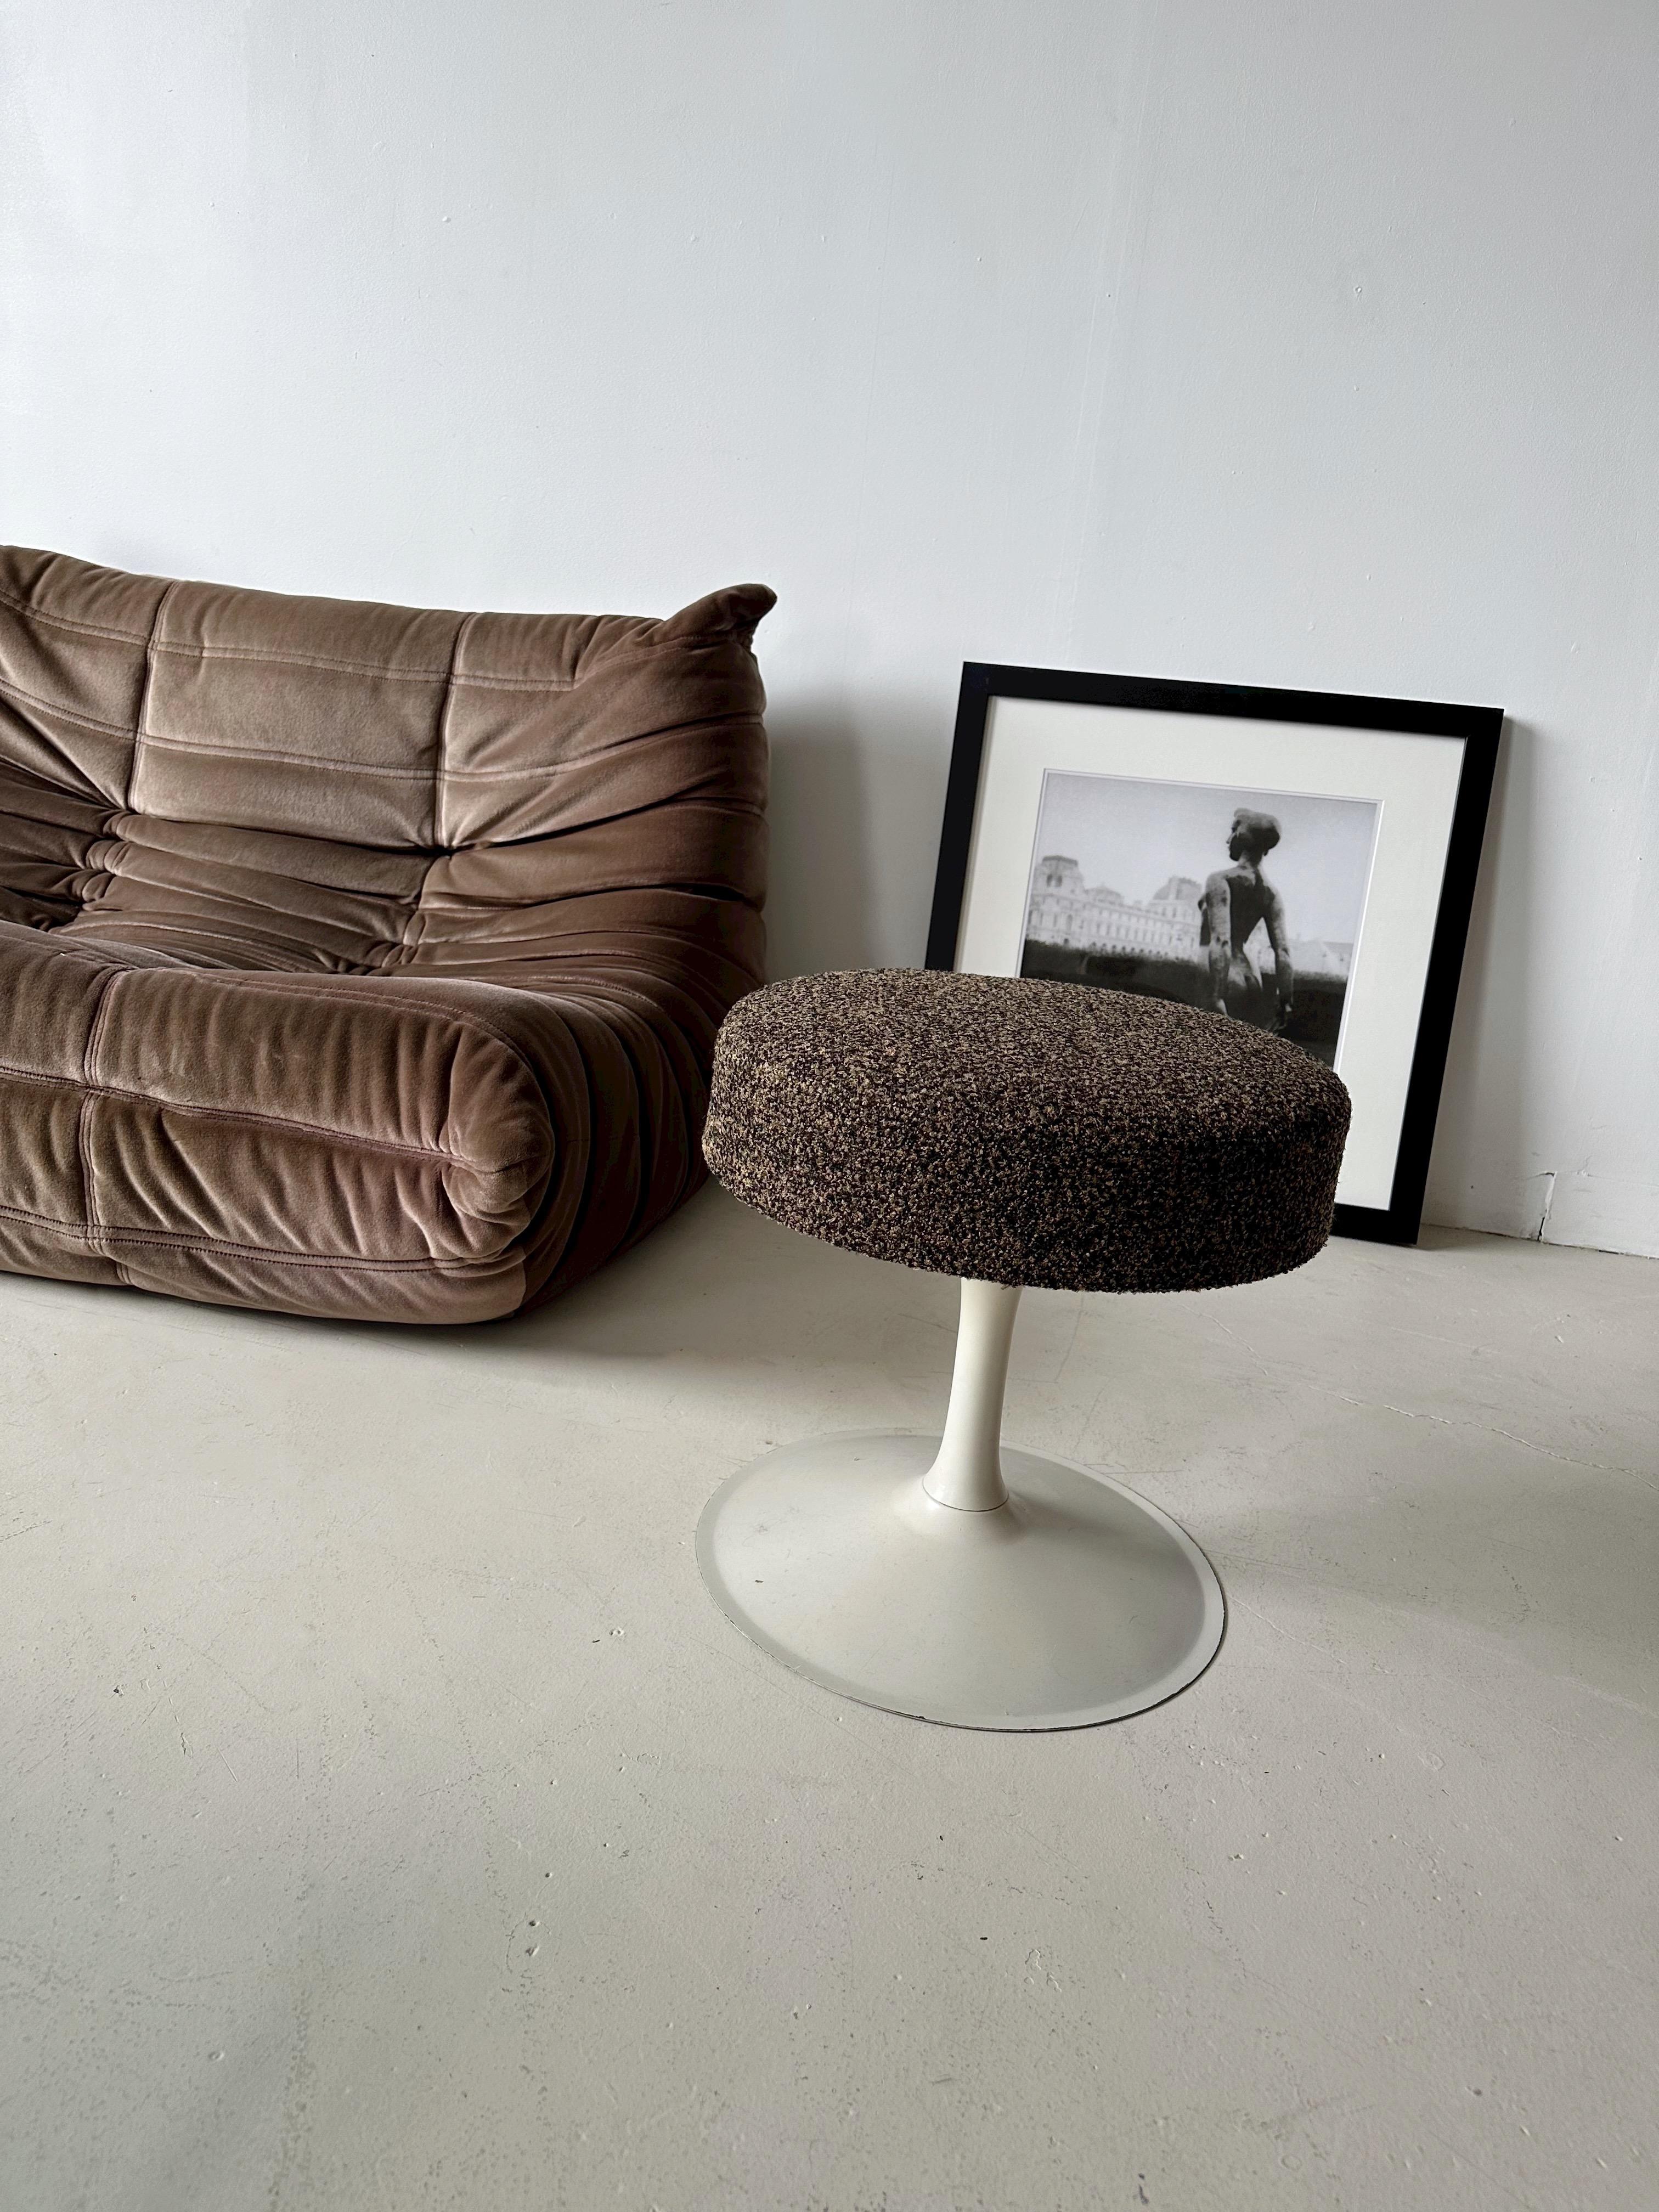 Space Age Tulip Chair / Stool with New Black & Brown Boucle Upholstery

//


Dimensions:

18”W x 18”D x 17”H 

//

*Very Good Condition, the seat is newly upholstered. Minor signs of use on the leg.